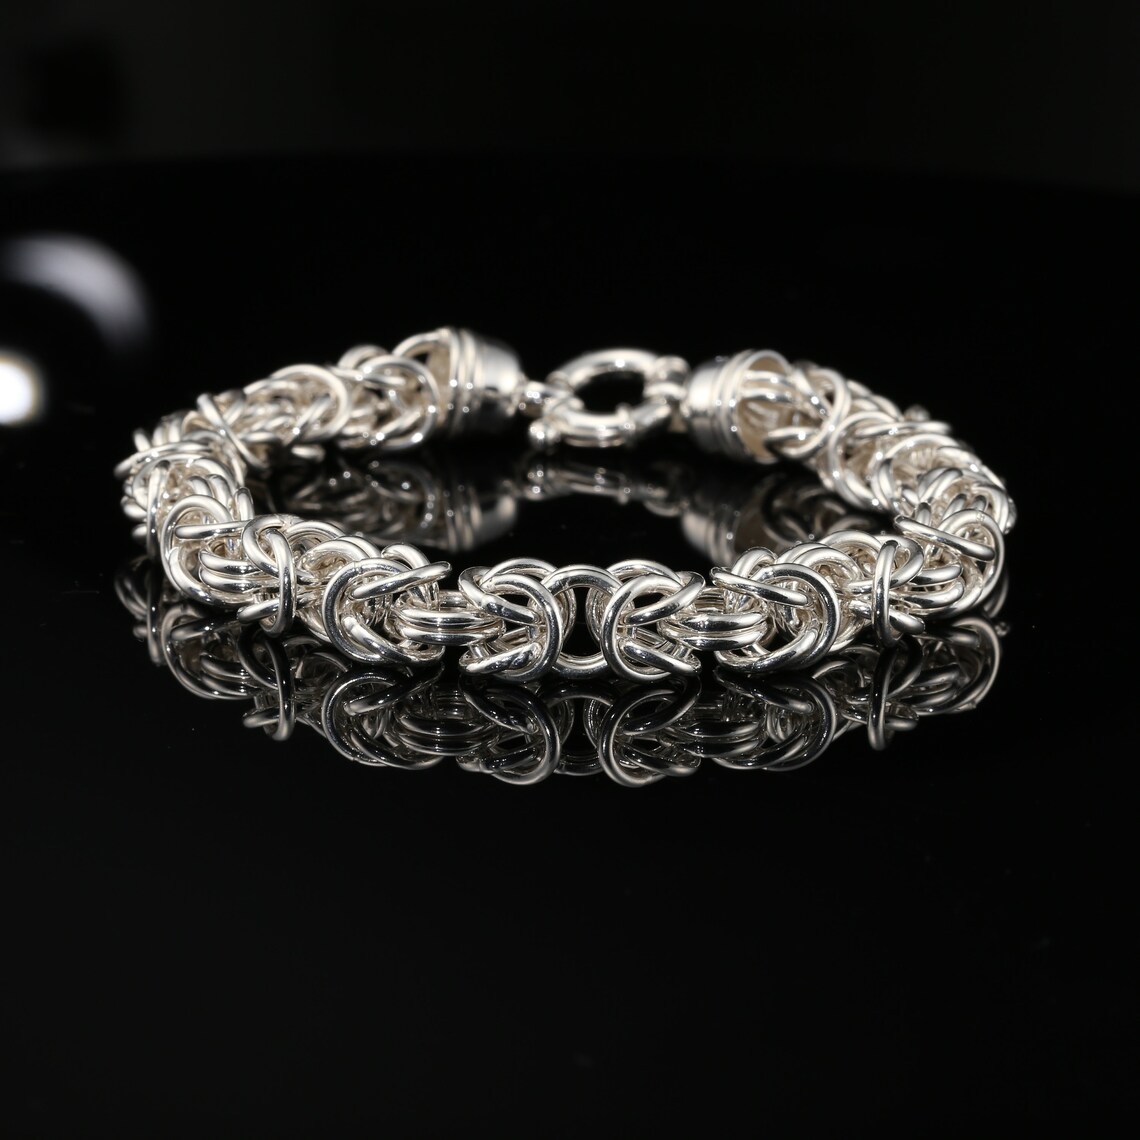 Byzantine Chain Bracelet Chainmail Jewelry in Sterling - Etsy